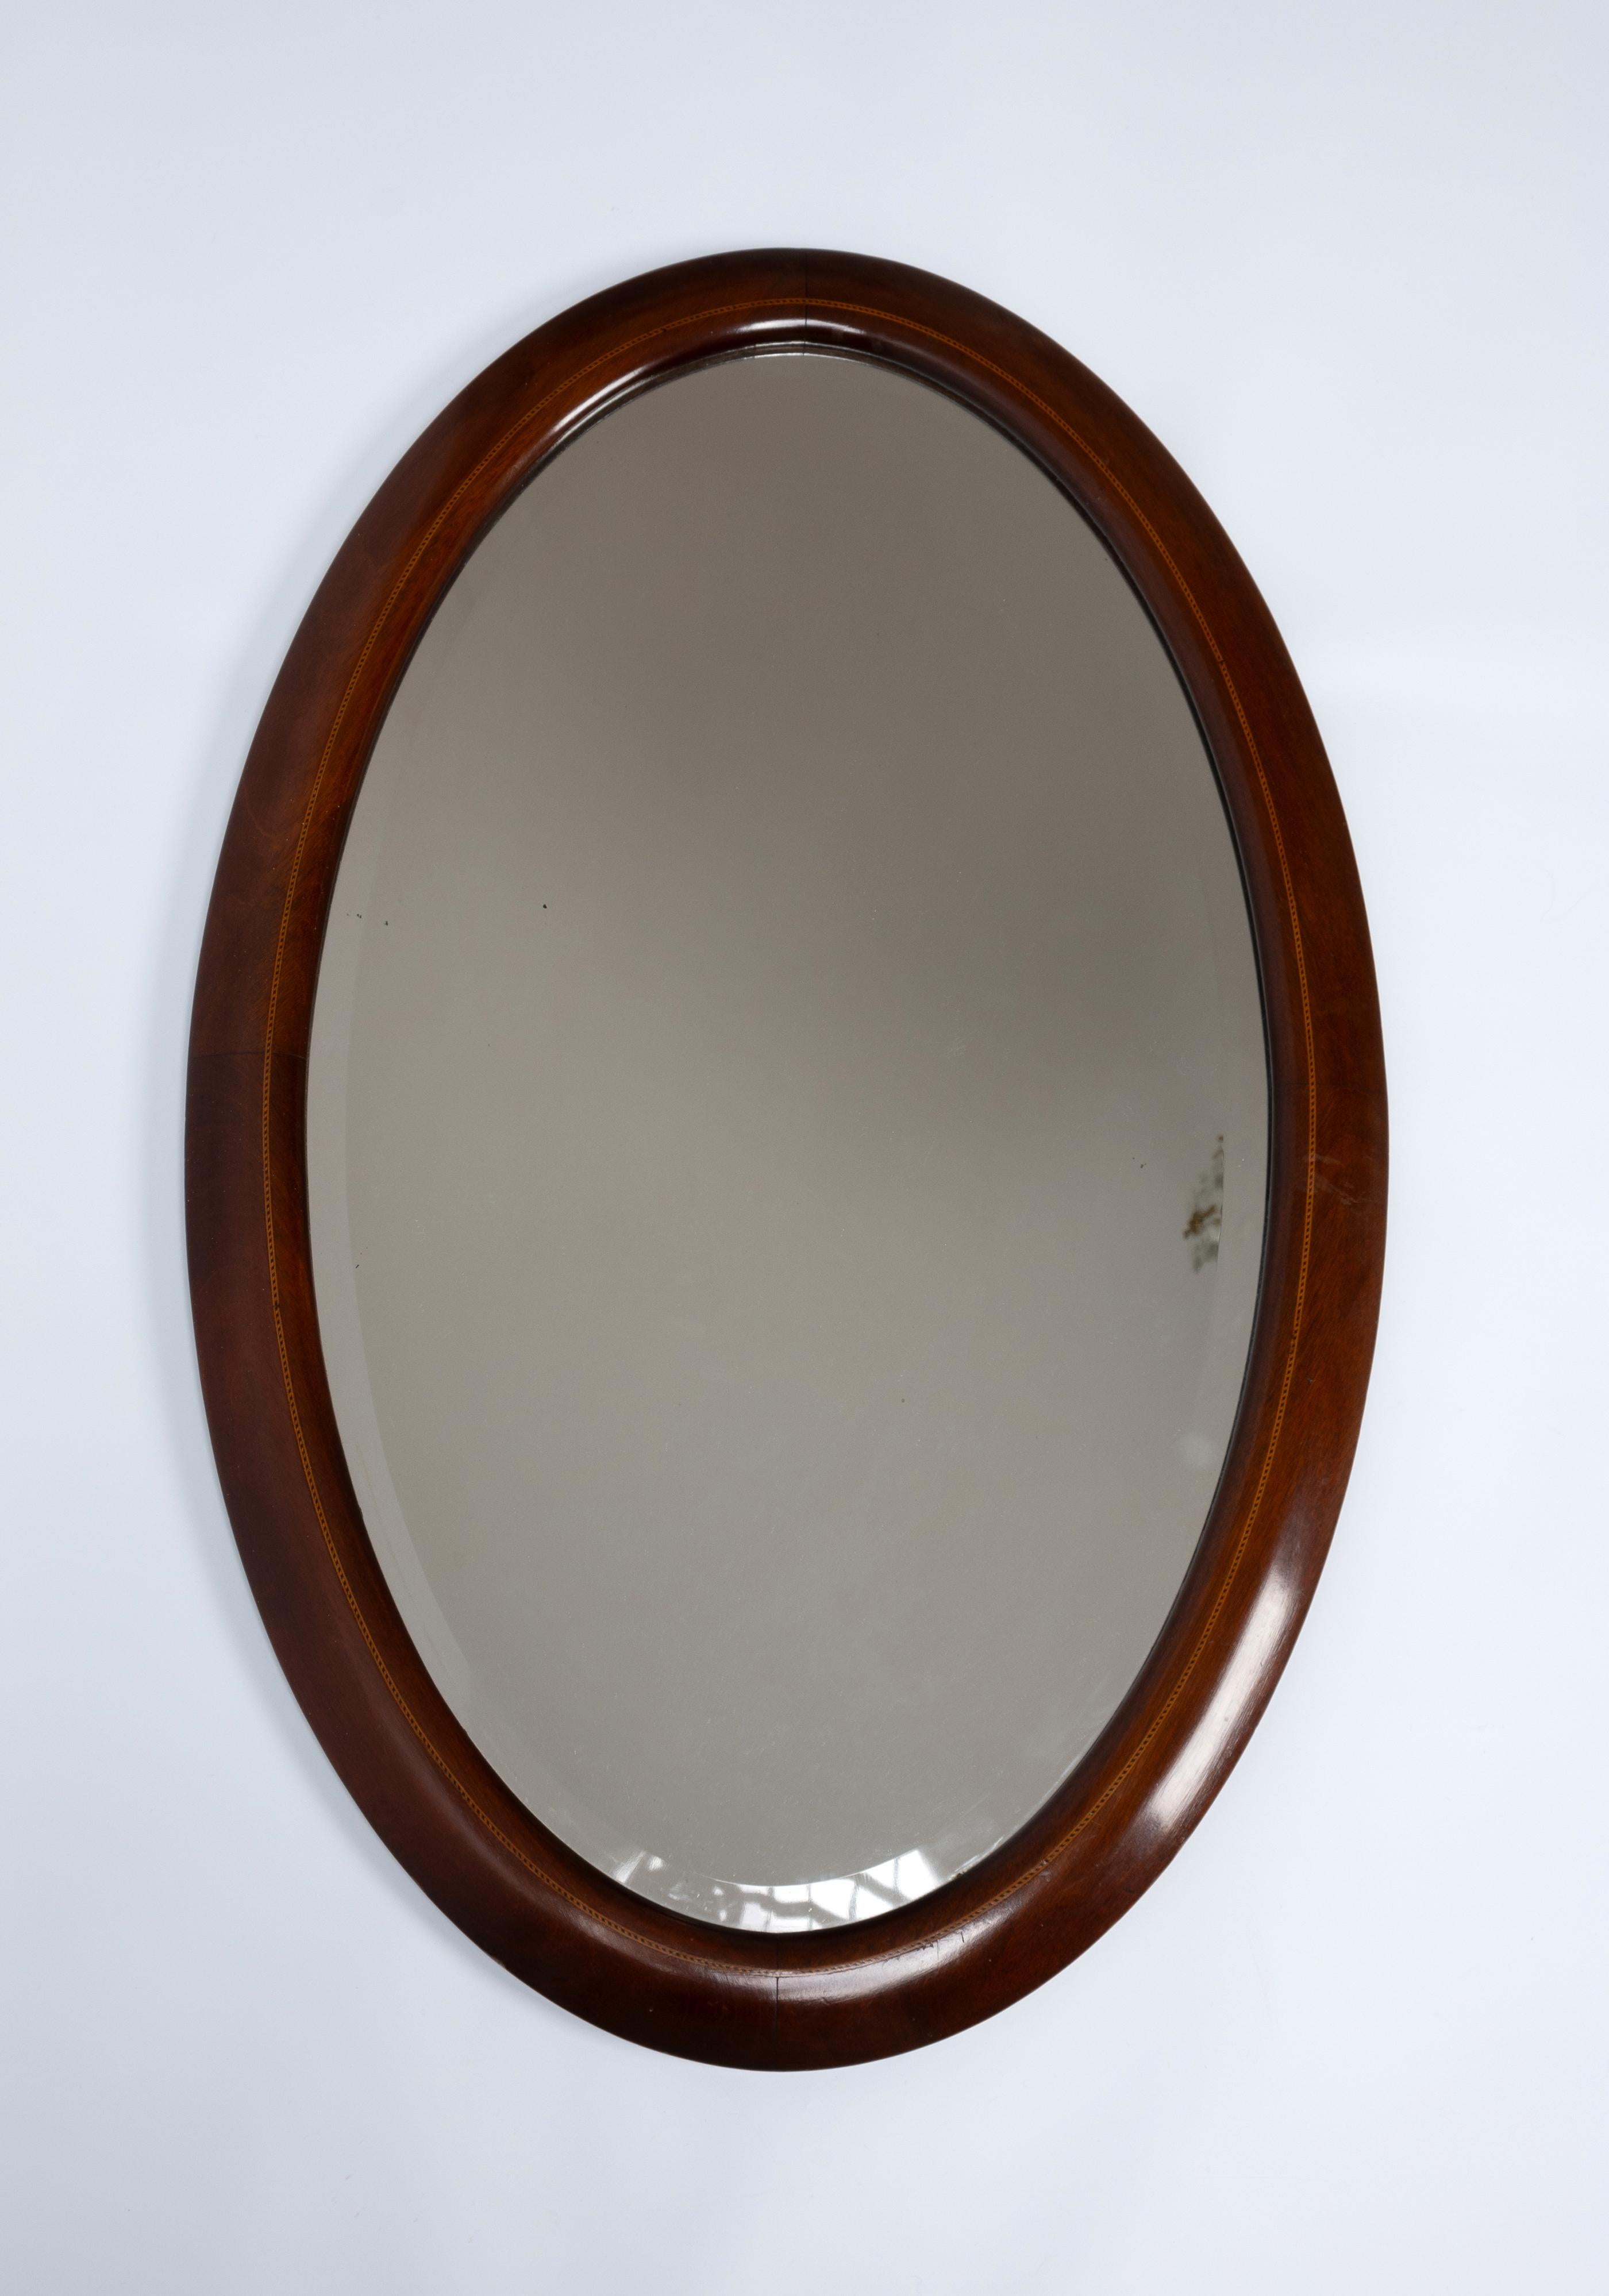 Antique English Sheraton Revival Cushioned Inlaid Mahogany Oval Mirror 
C.1900
Elegant mirror with boxwood inlay. Attractive original thick bevelled glass.

Presented in very good condition commensurate of age. 